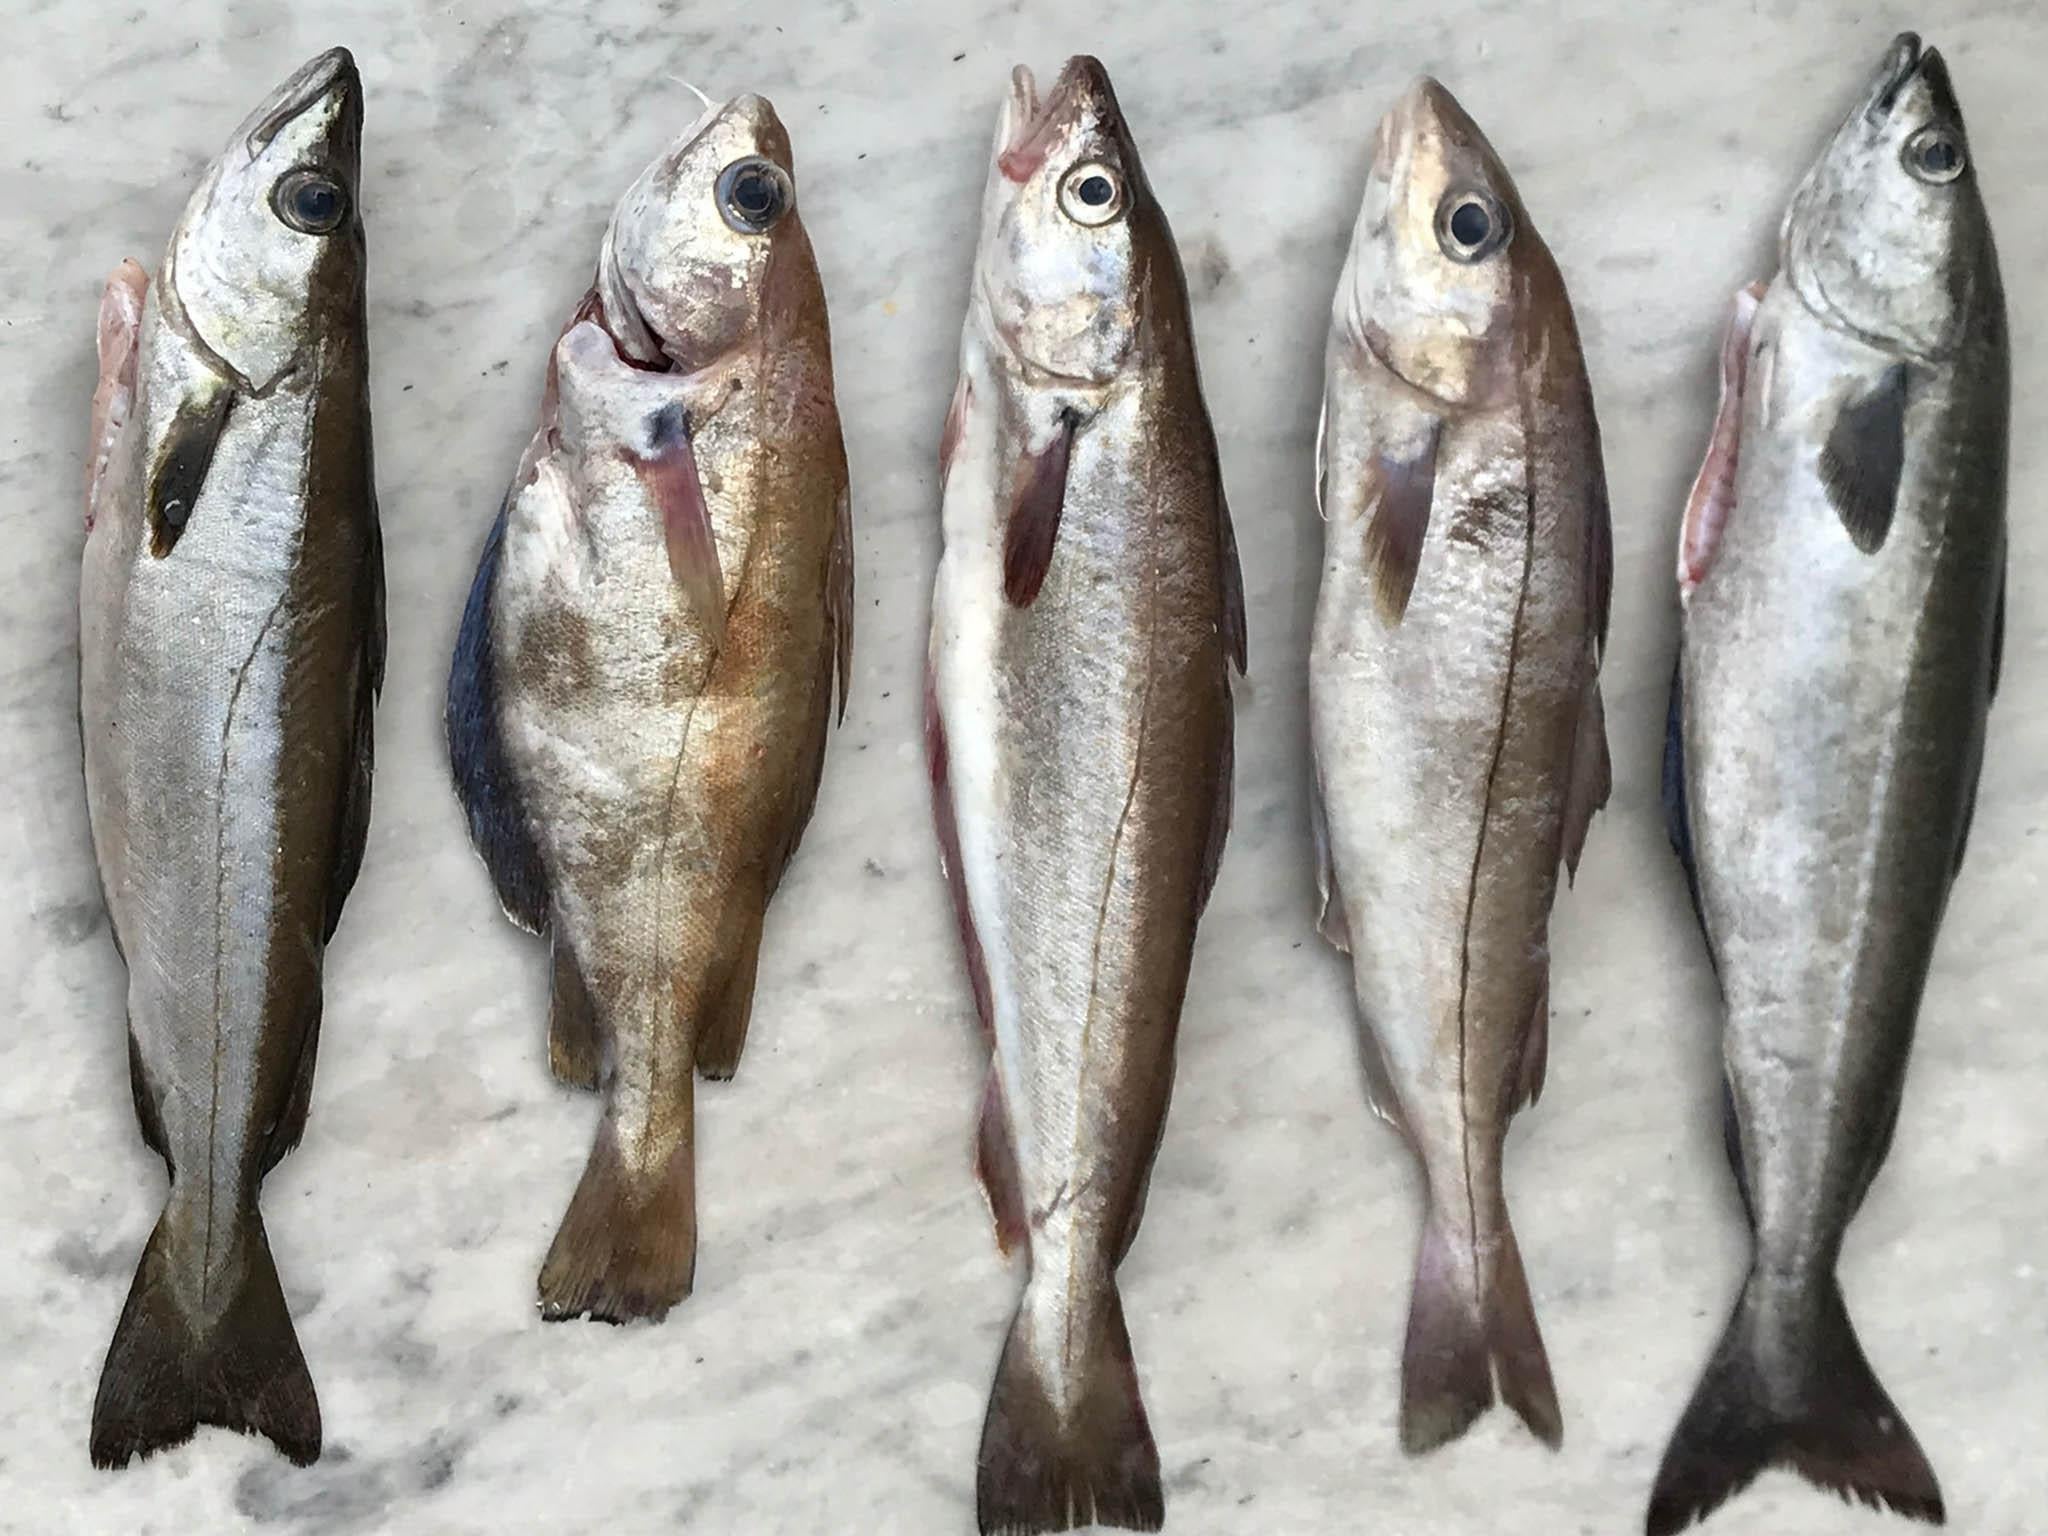 Five types of fish of widely eaten in Britain while 150 types are caught